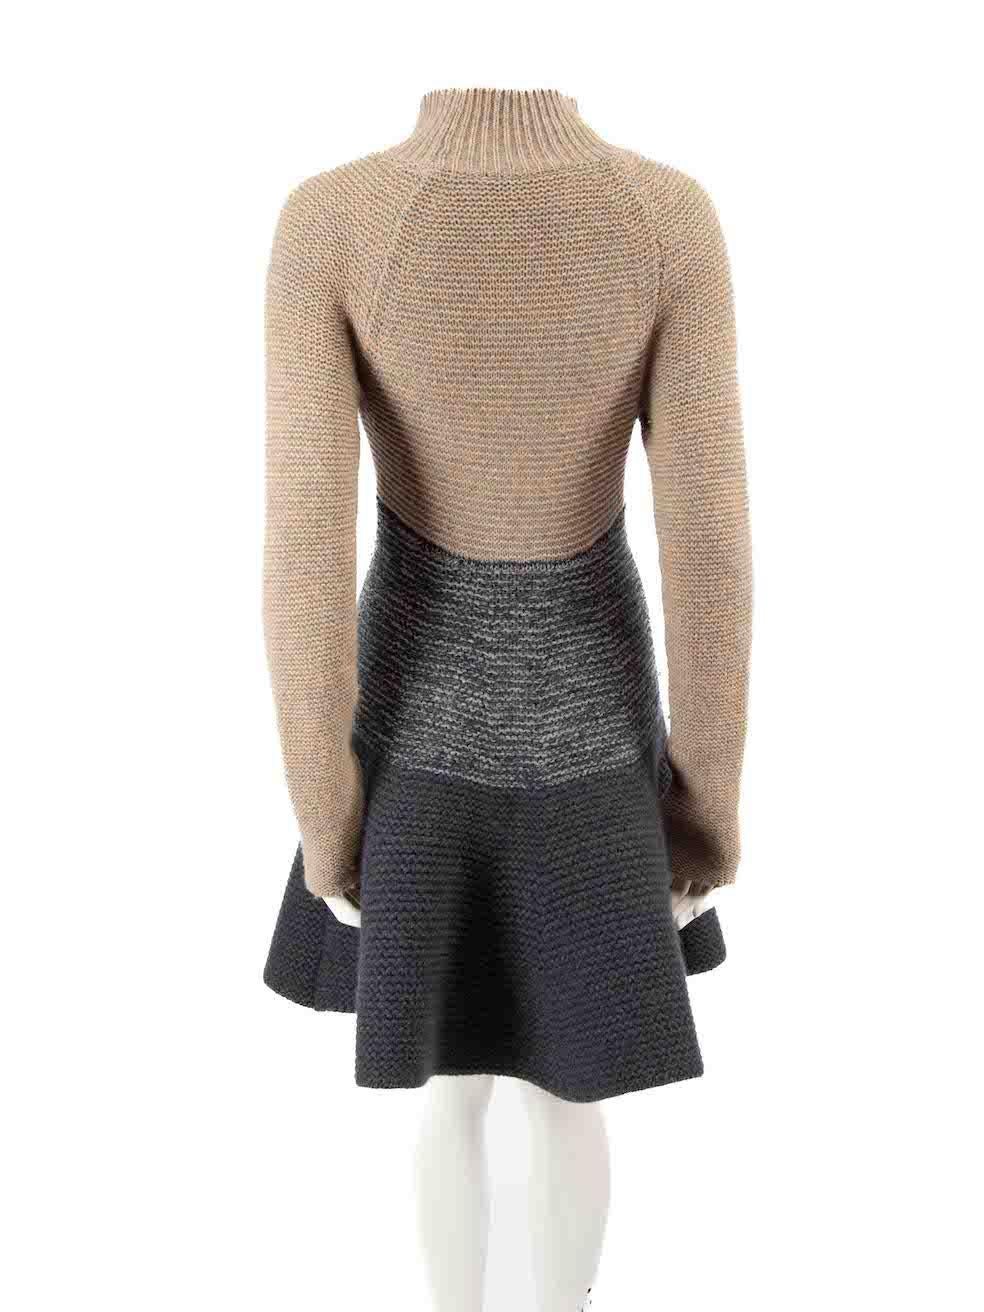 Stella McCartney Turtleneck Wool Knit Dress Size M In Excellent Condition For Sale In London, GB